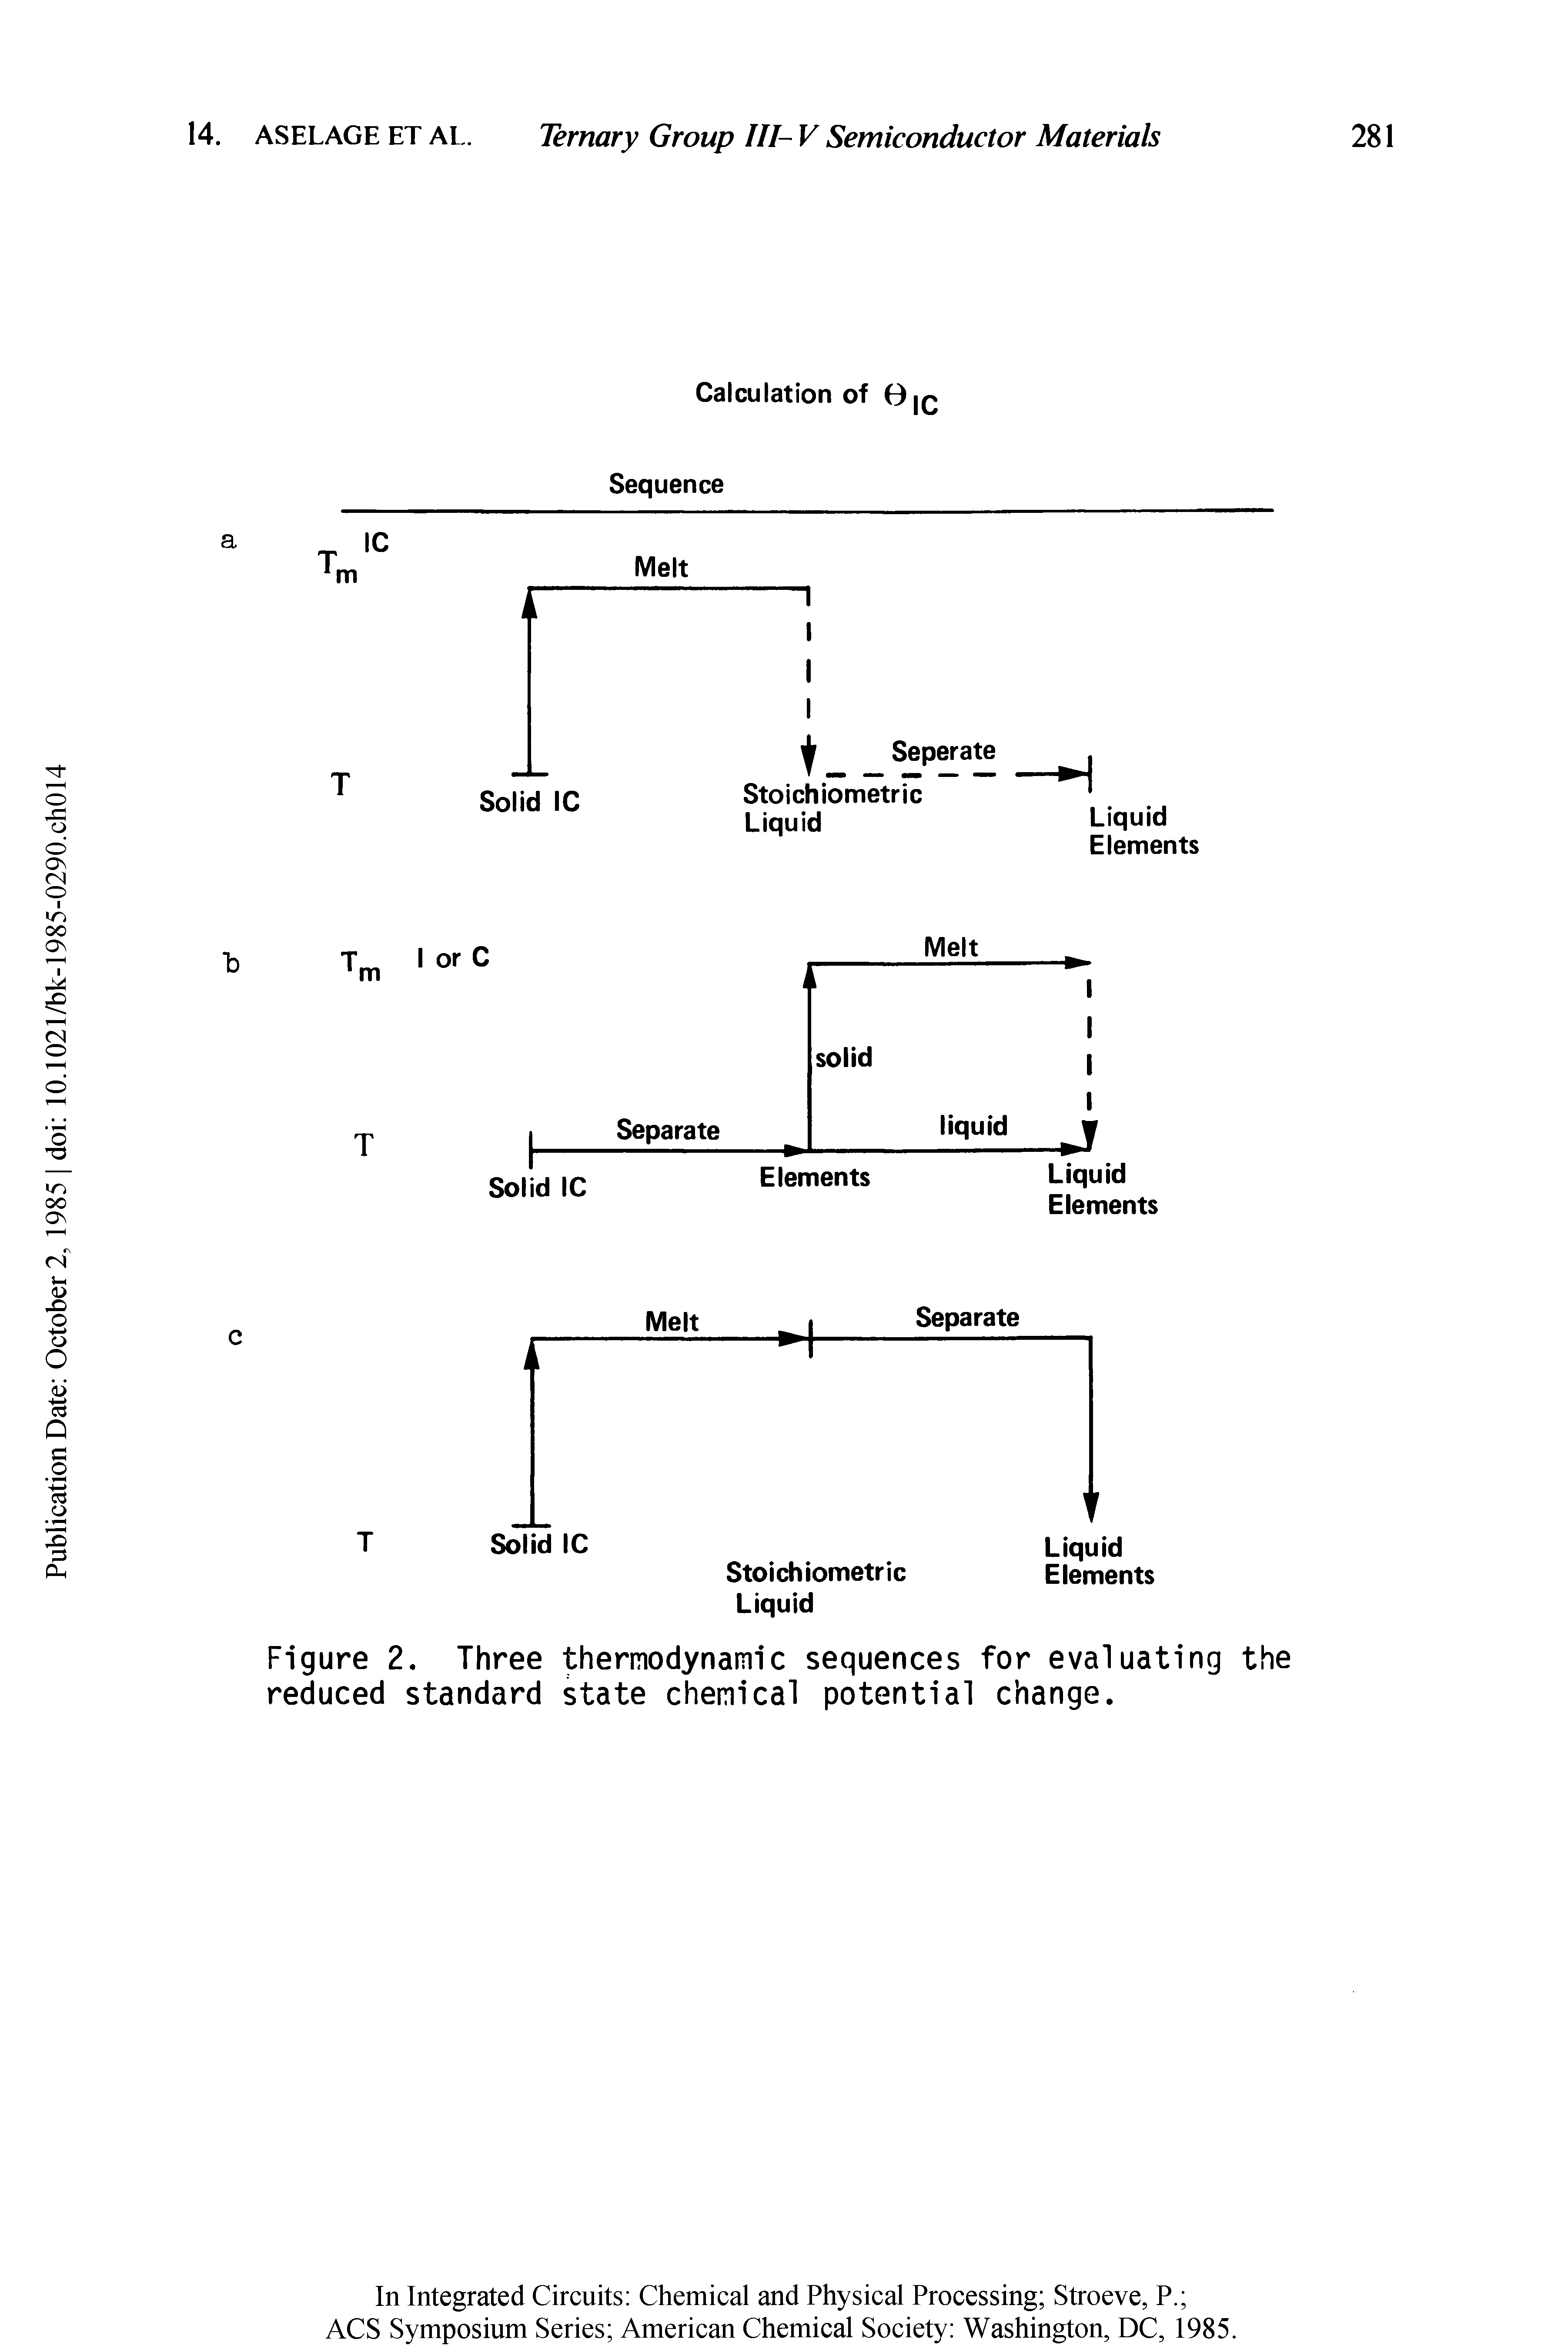 Figure 2. Three thermodynamic sequences for evaluating the reduced standard state chemical potential change.